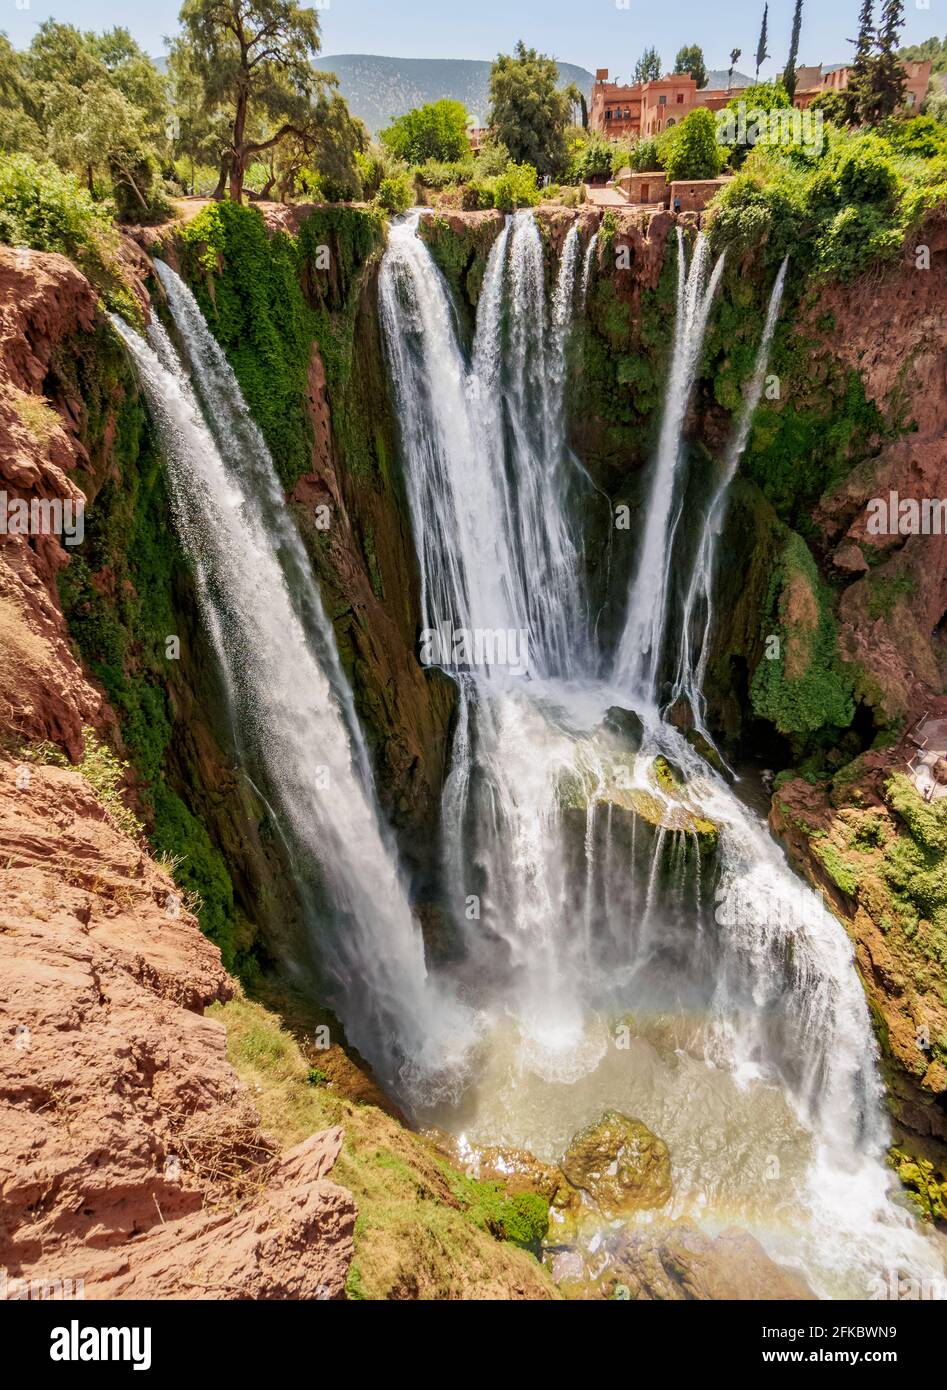 Ouzoud Falls near the Middle Atlas village of Tanaghmeilt, elevated view, Azilal Province, Beni Mellal-Khenifra Region, Morocco, North Africa, Africa Stock Photo